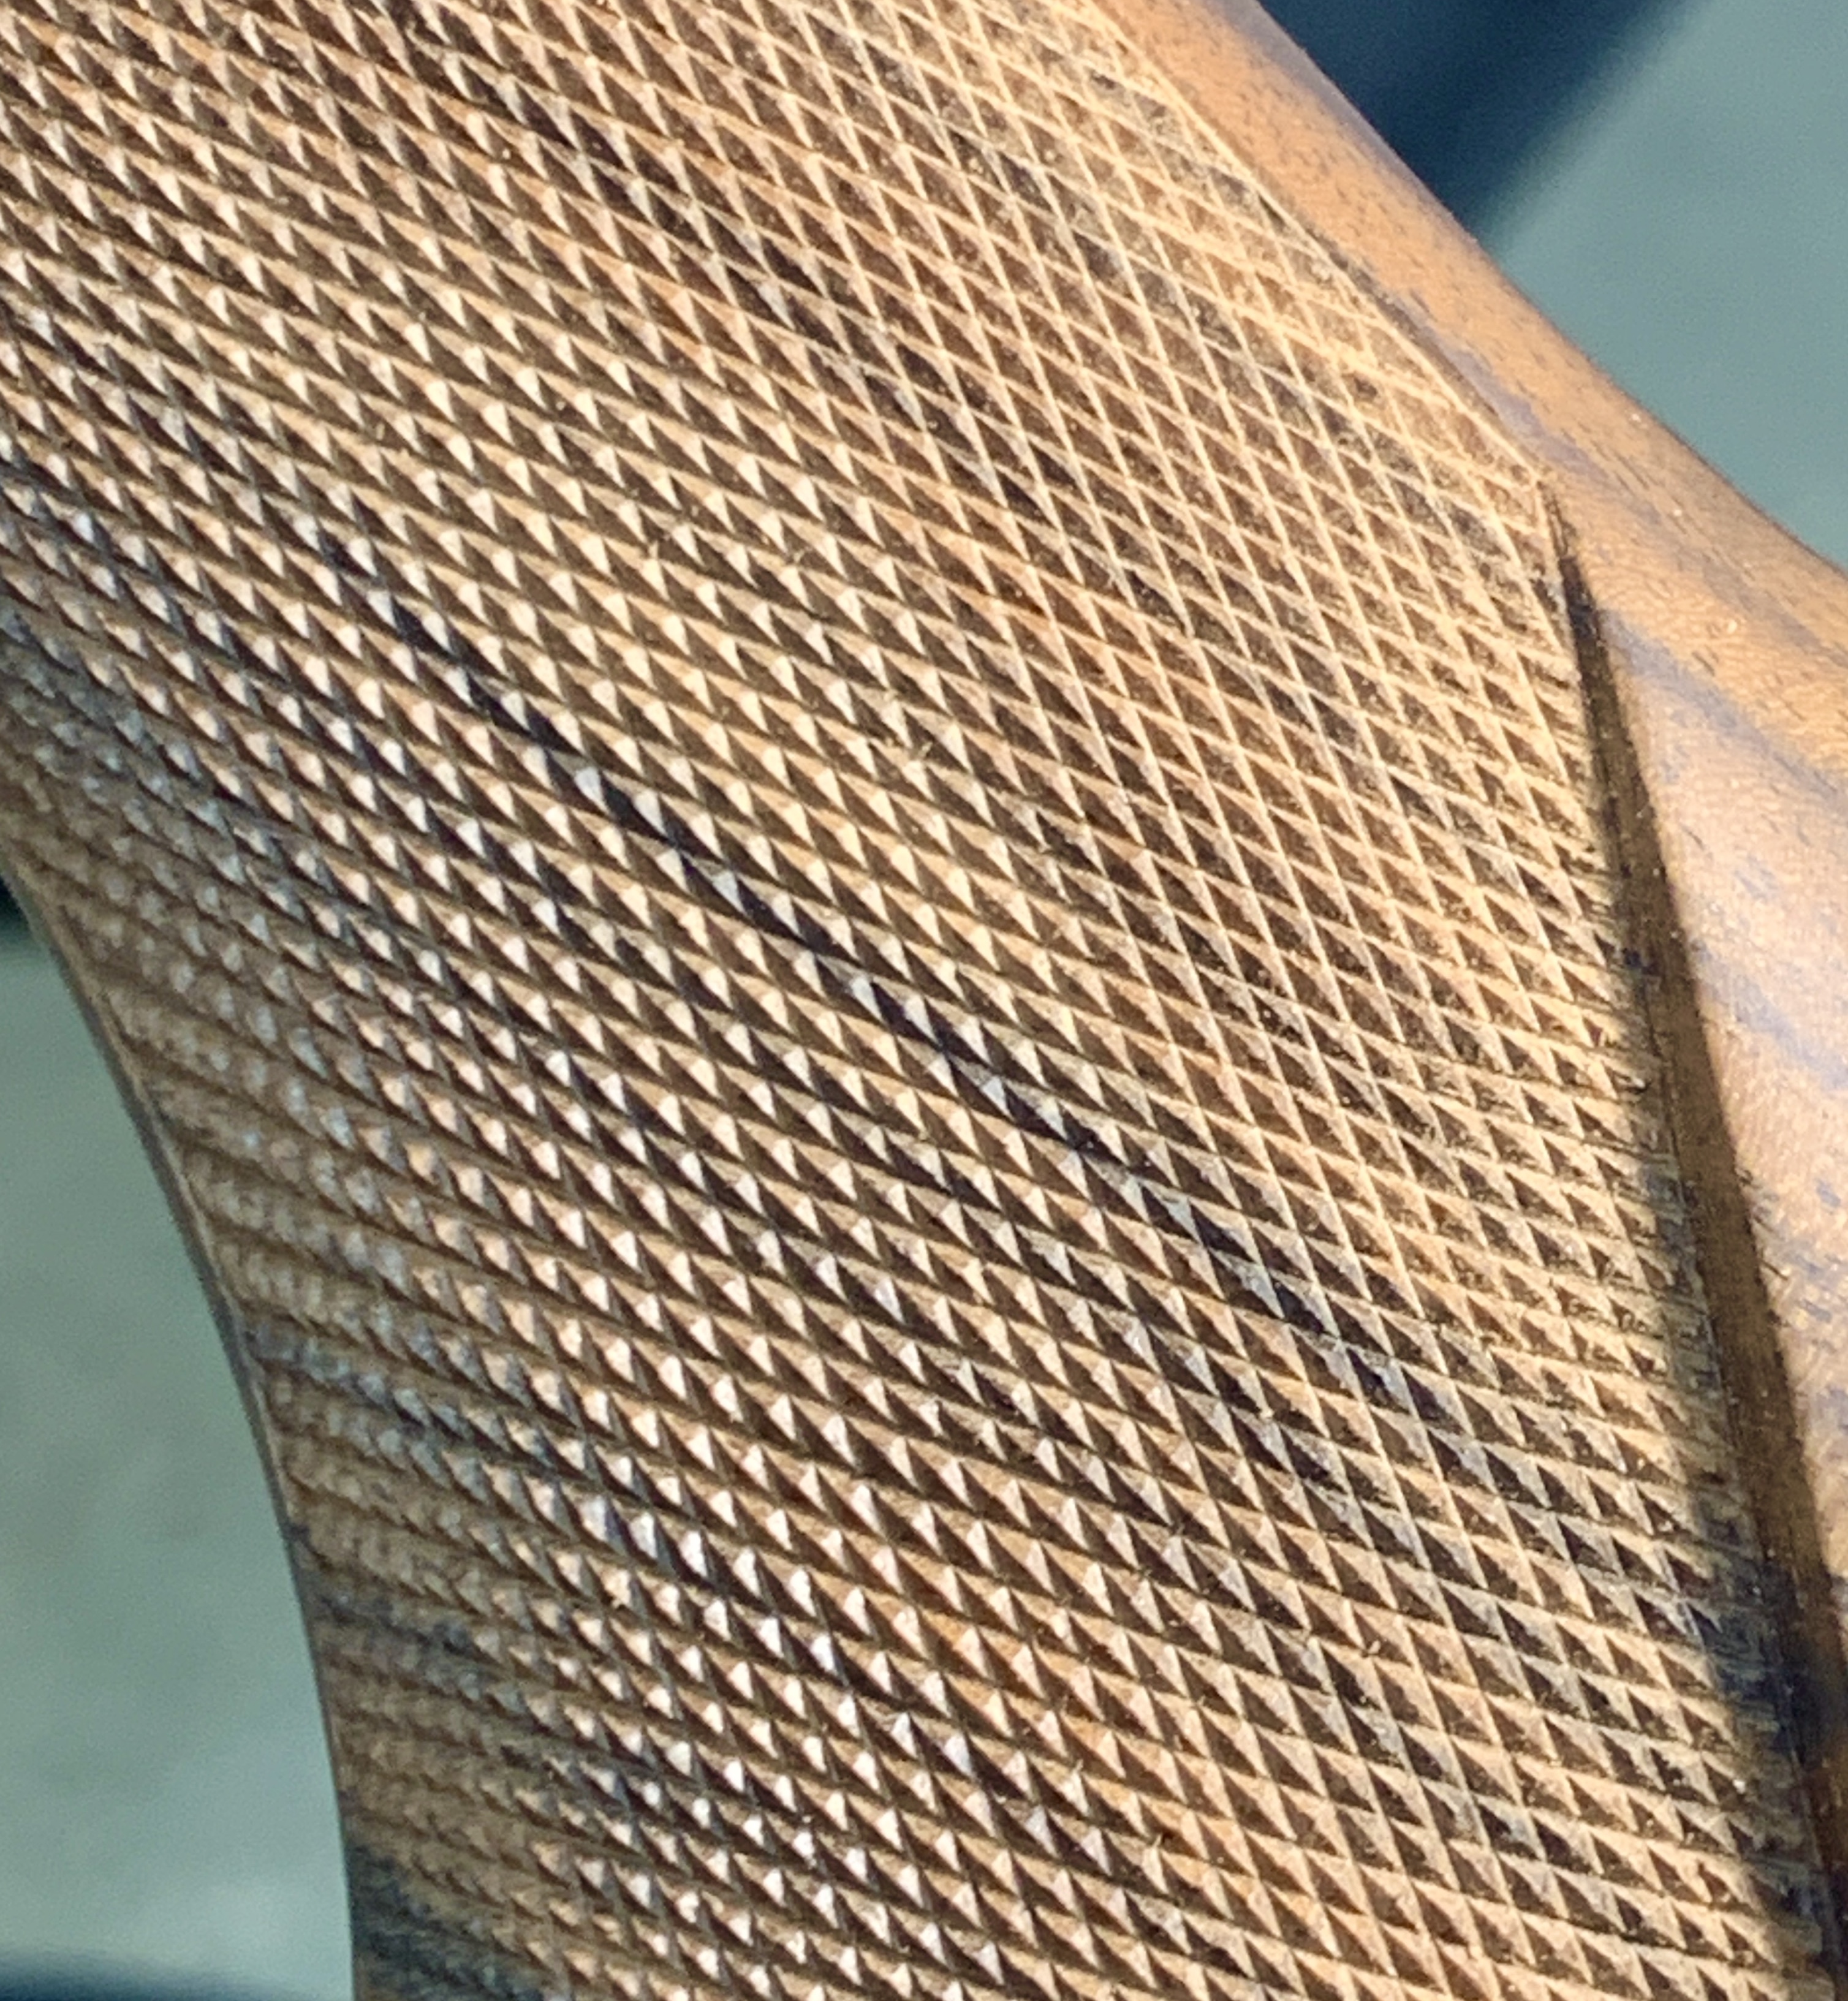 A close-up of a 2.5:1 checkering pattern.